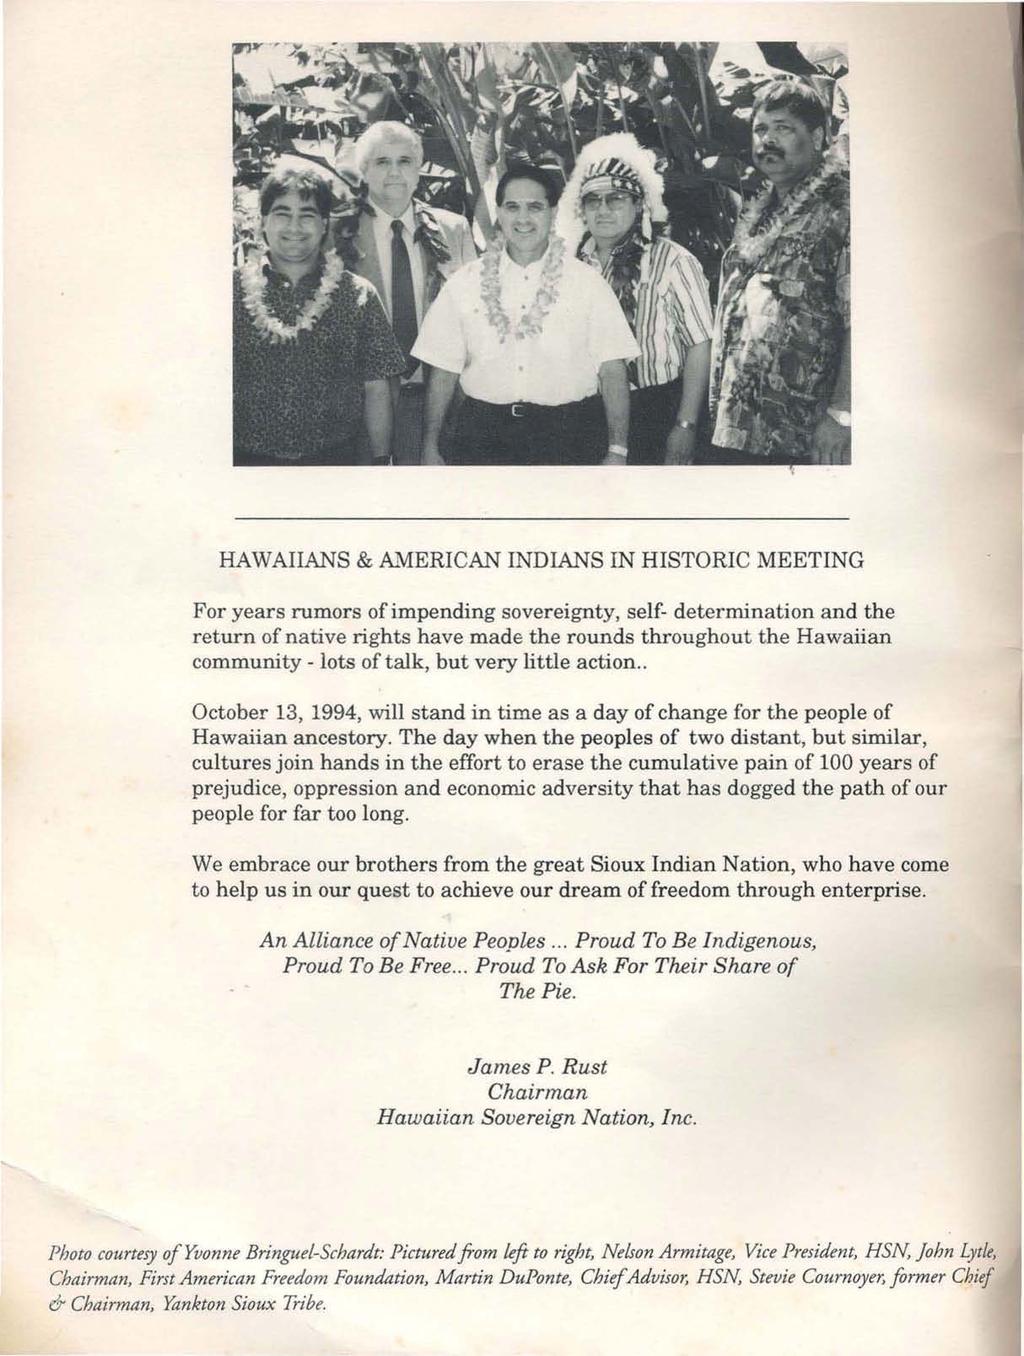 HAWAIIANS & k\1erican INDIANS IN HISTORIC MEETING For years rumors of impending sovereignty, self- determination and the return of native rights have made the rounds throughout the Hawaiian community